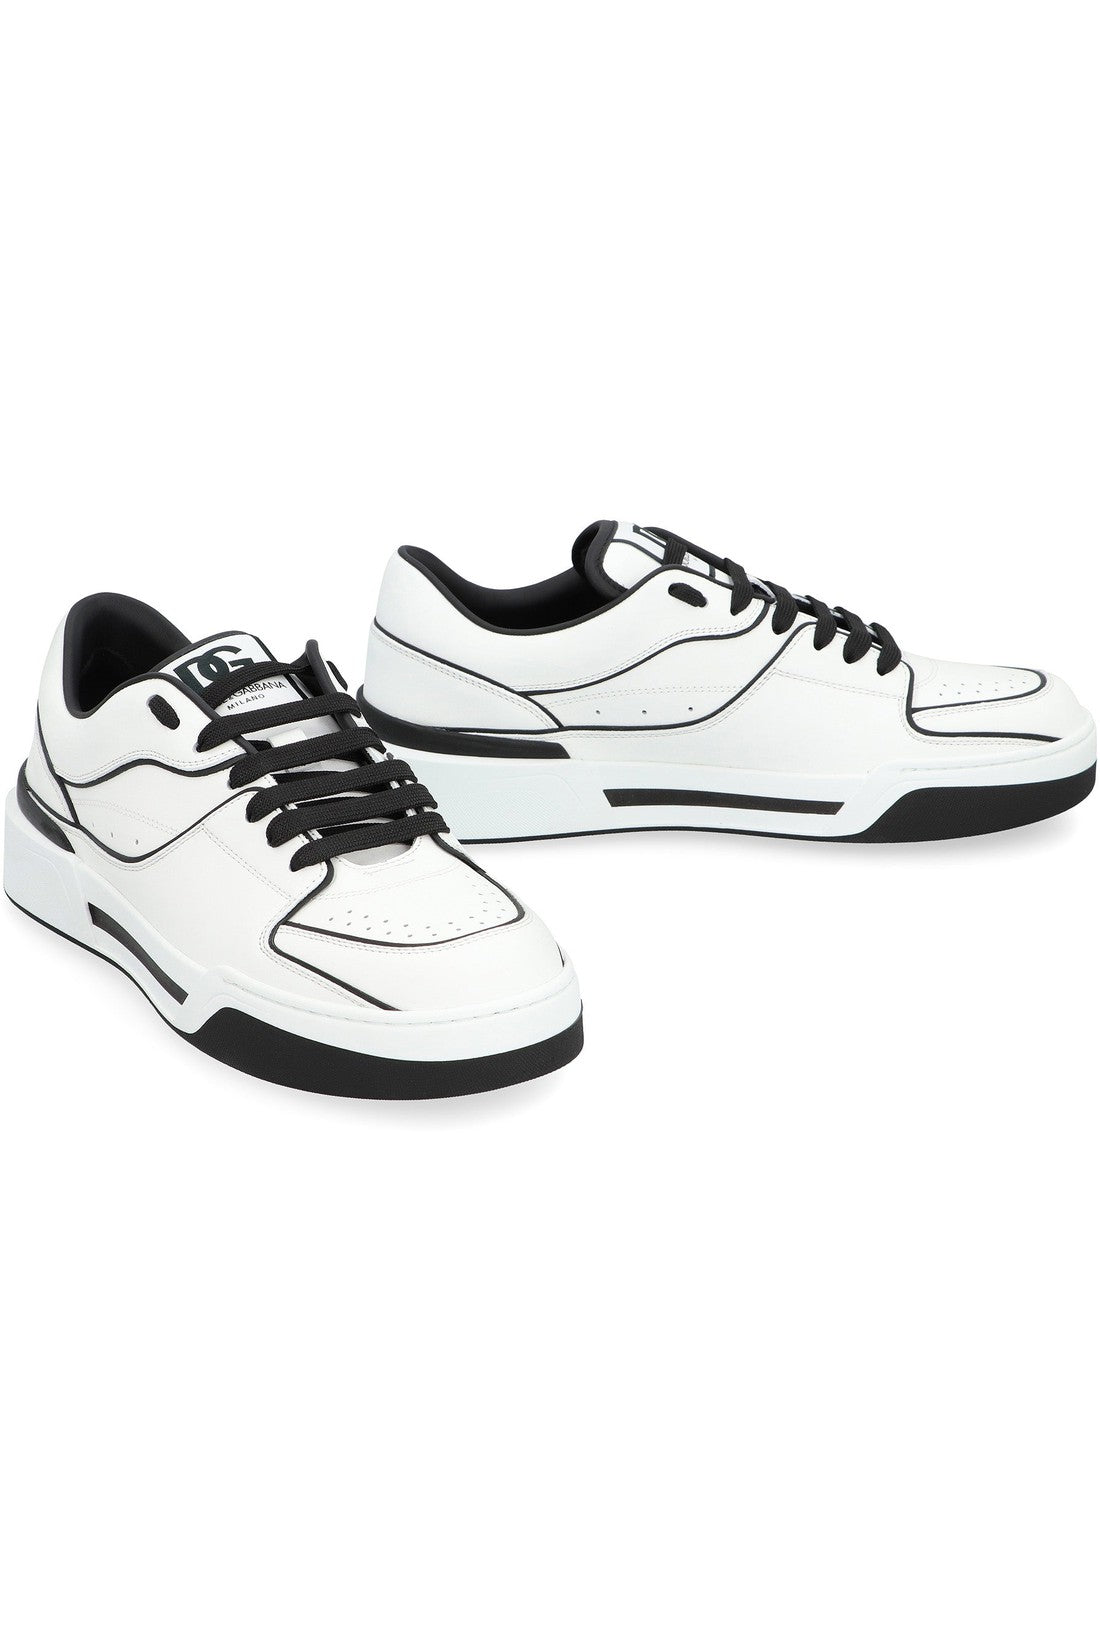 Dolce & Gabbana-OUTLET-SALE-New Roma leather low-top sneakers-ARCHIVIST